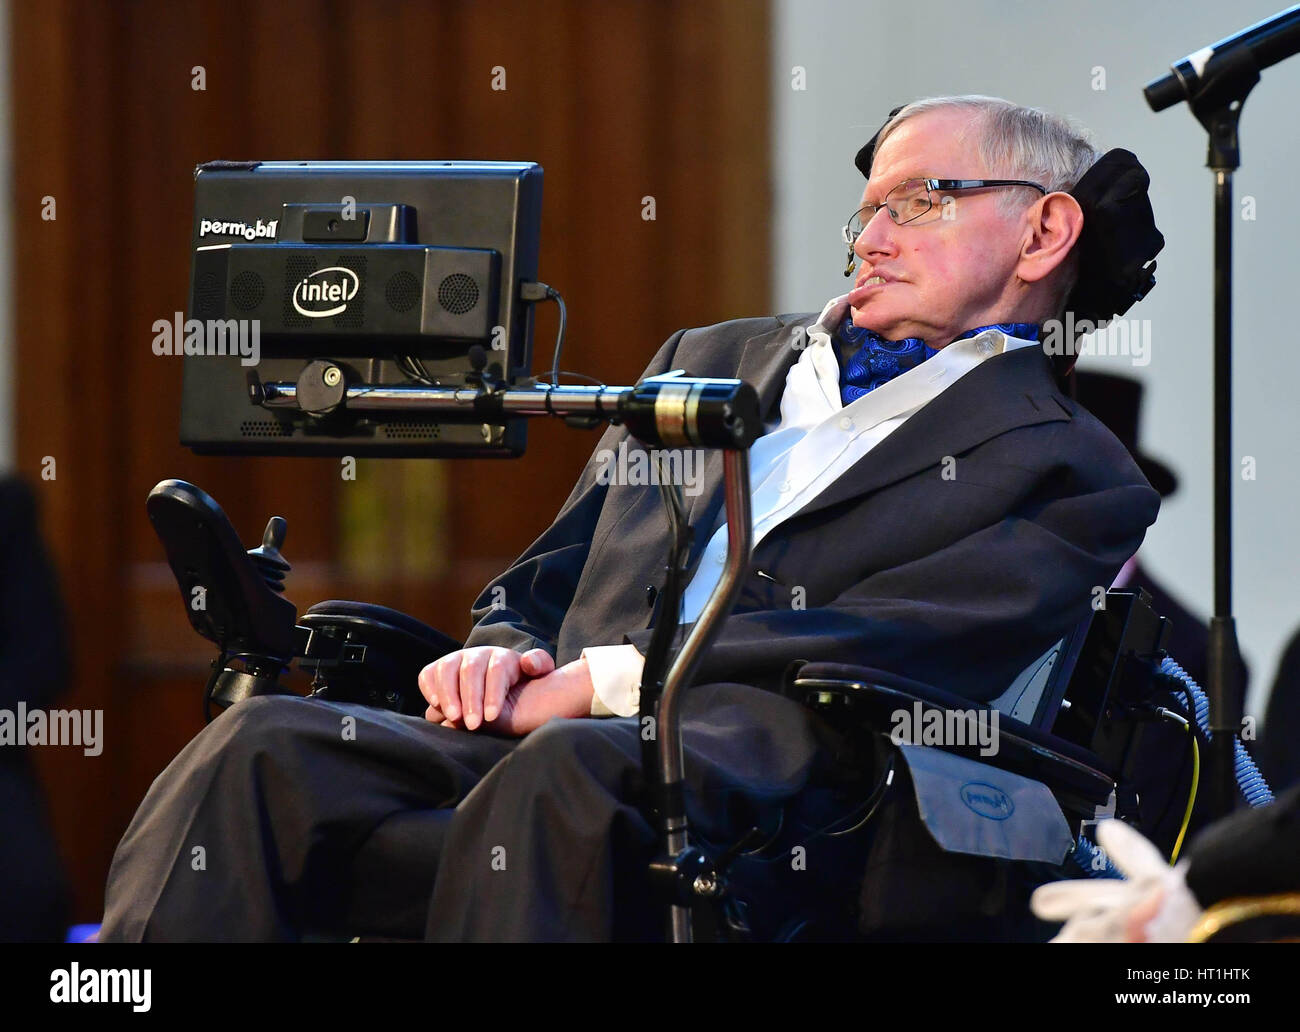 Professor Stephen Hawking receives the Honorary Freedom of the City of London, in recognition of his outstanding contribution to theoretical physics and cosmology, at Guildhall in London. Stock Photo